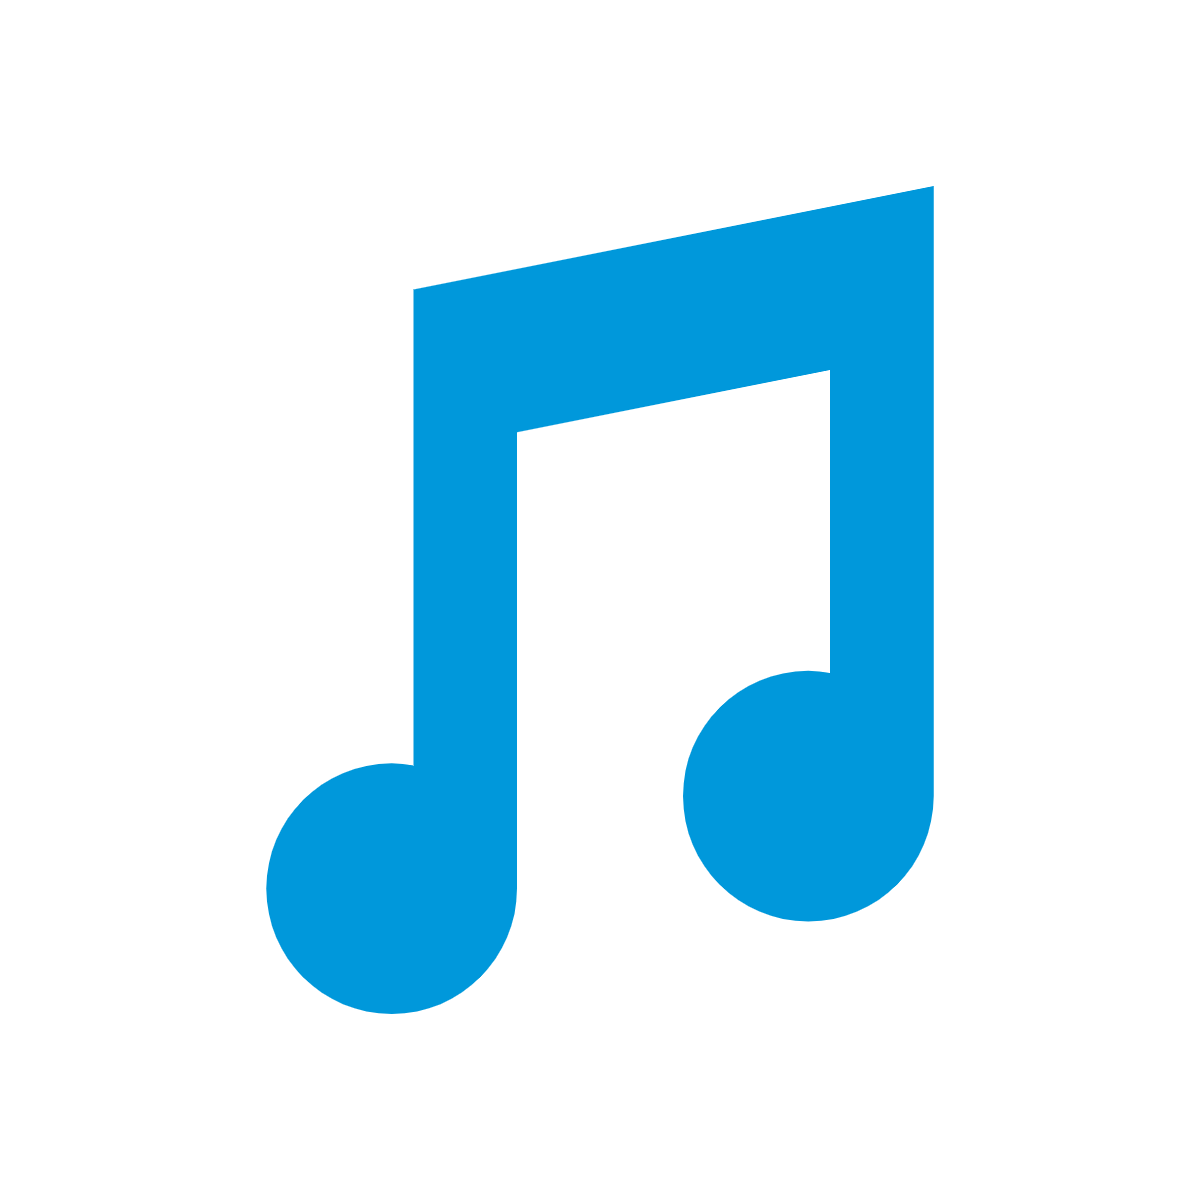 Blue music note icon